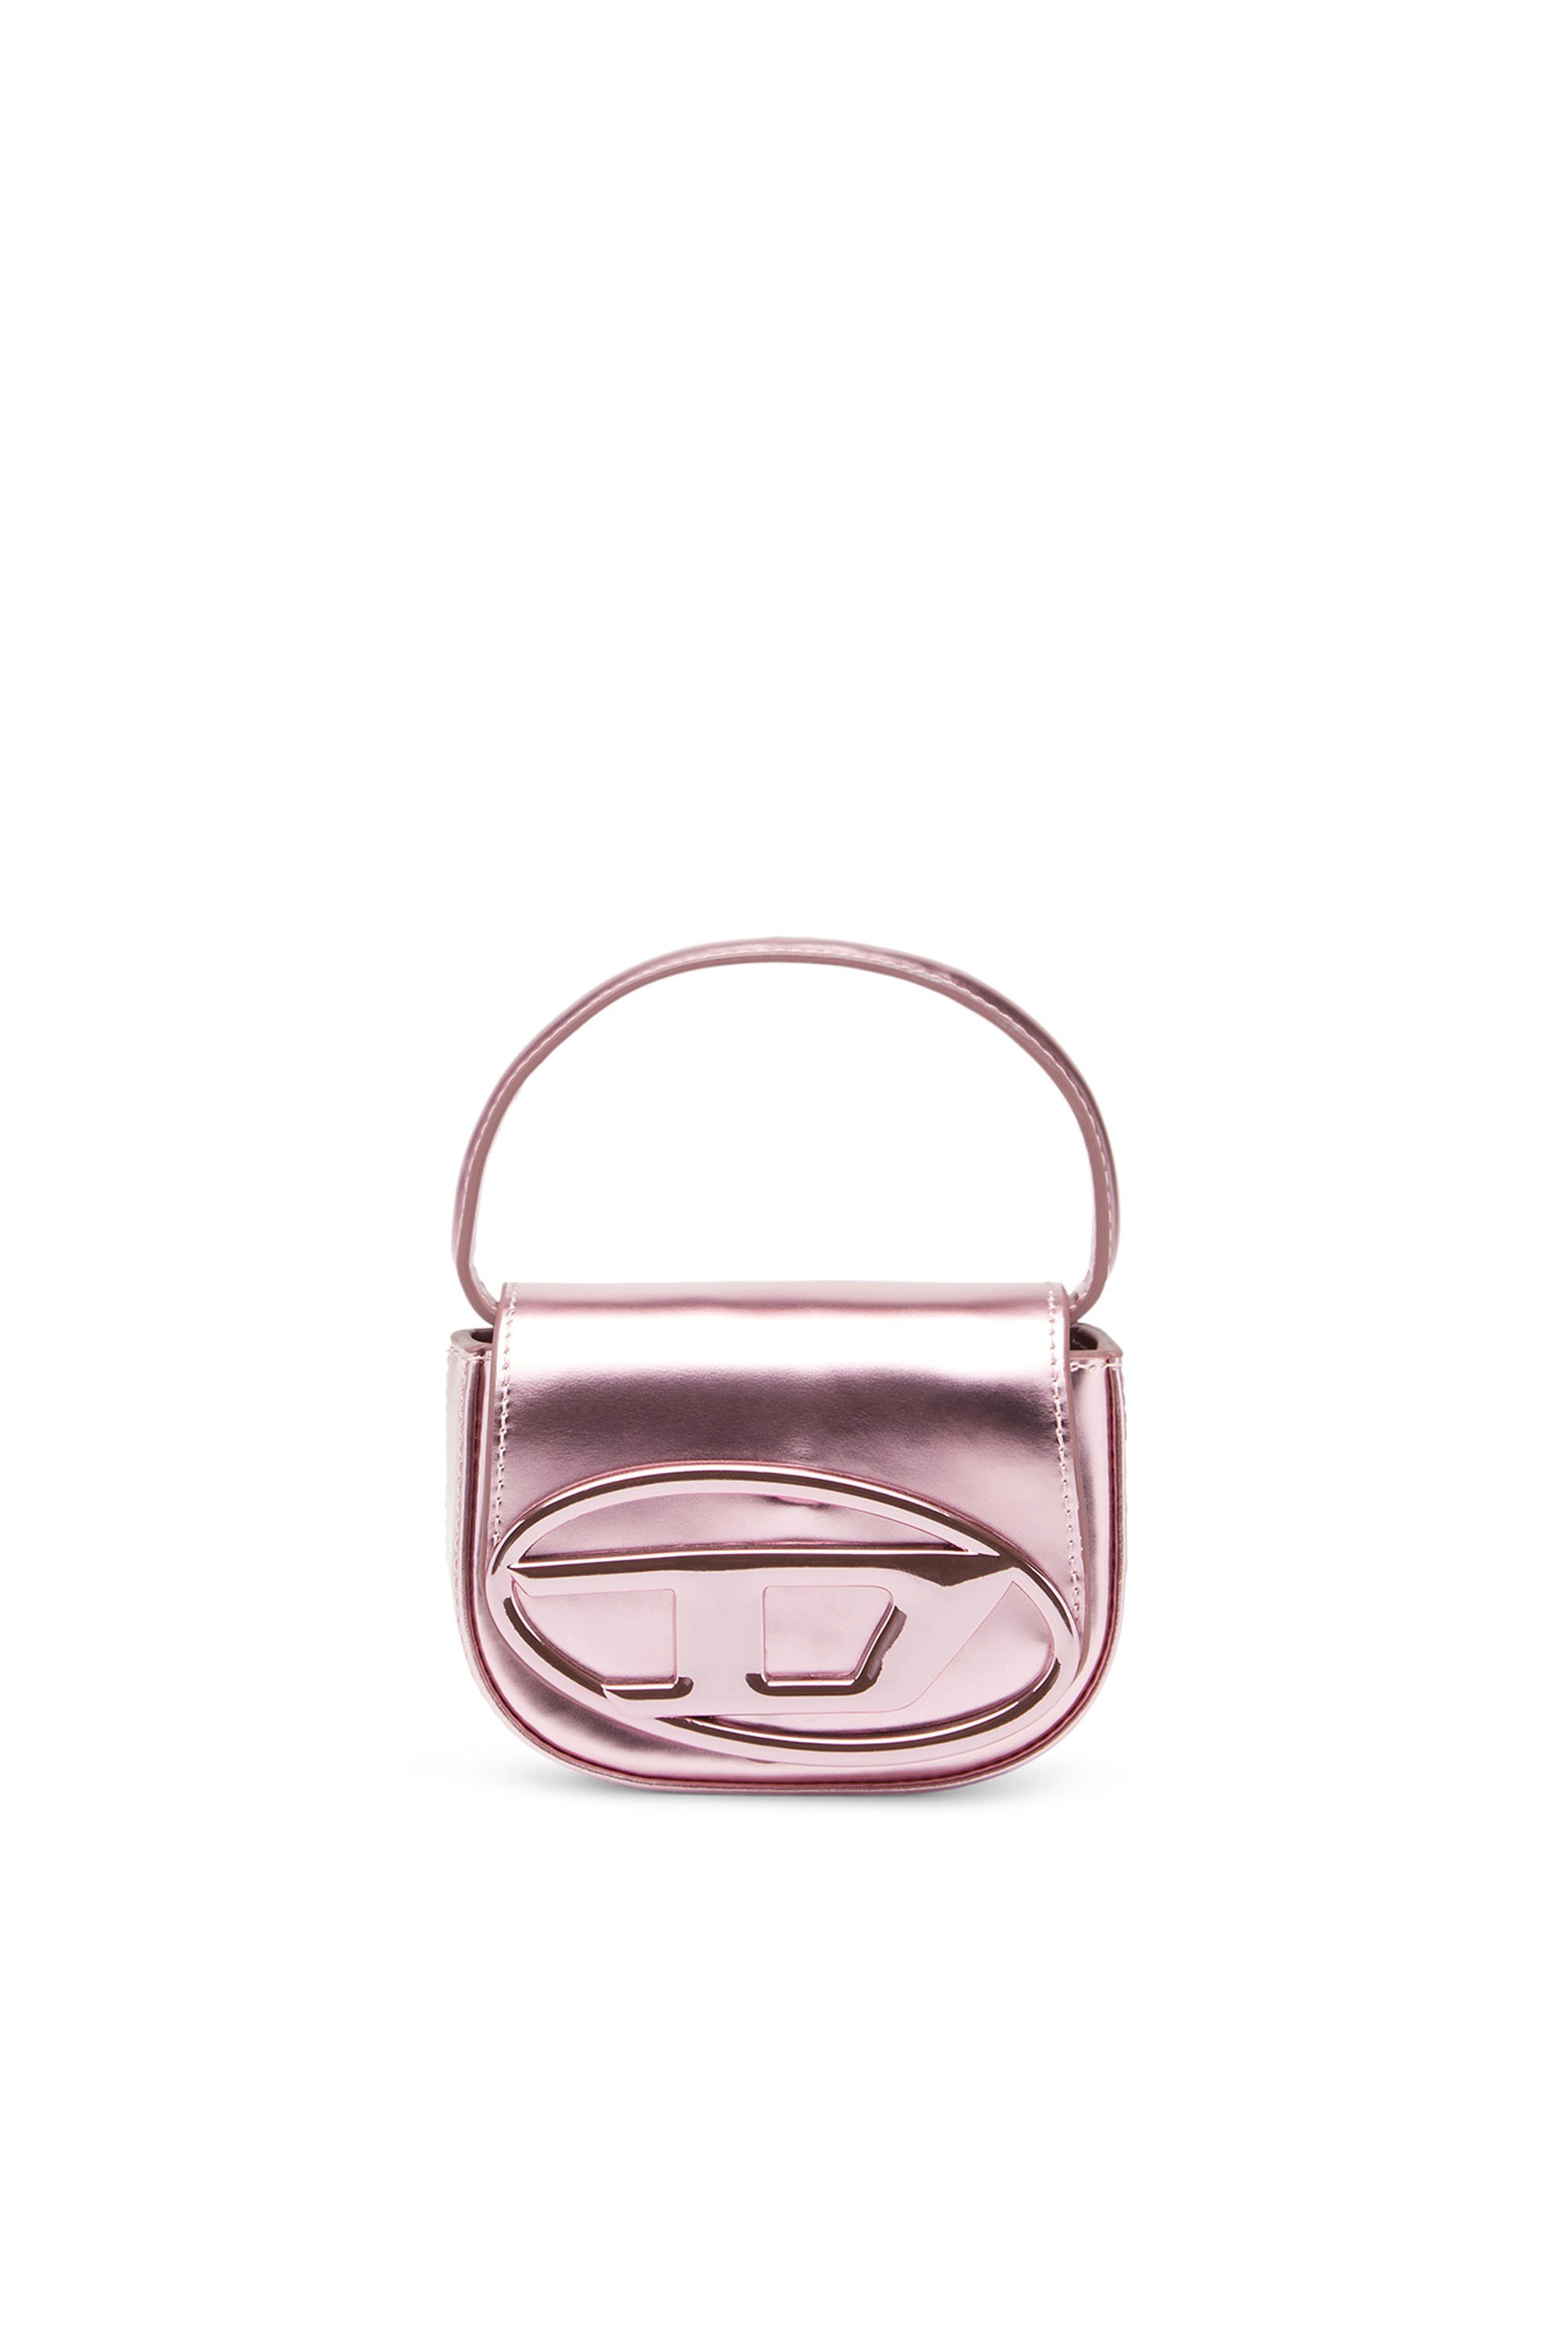 Diesel - 1DR-XS-S, Woman 1DR-XS-S-Iconic mini bag in mirrored leather in Pink - Image 2